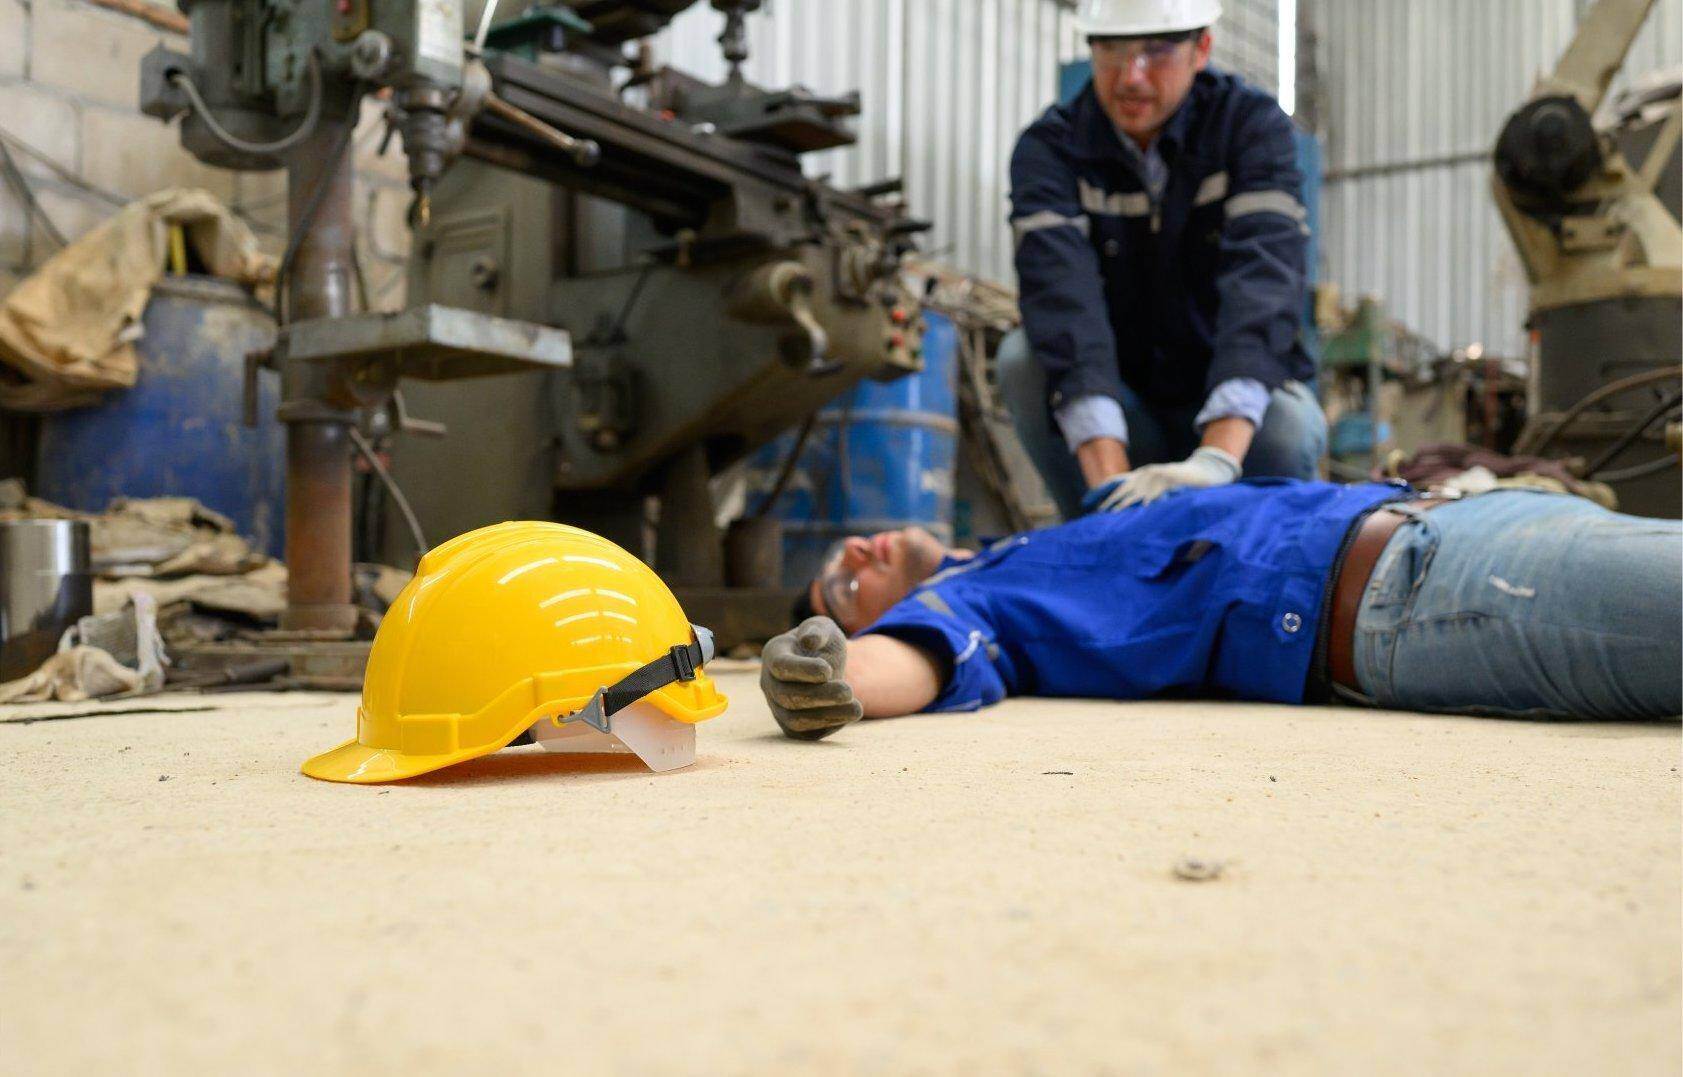 An unconscious man who has been injured on the job who will file for workers compensation in Hinesville, Georgia